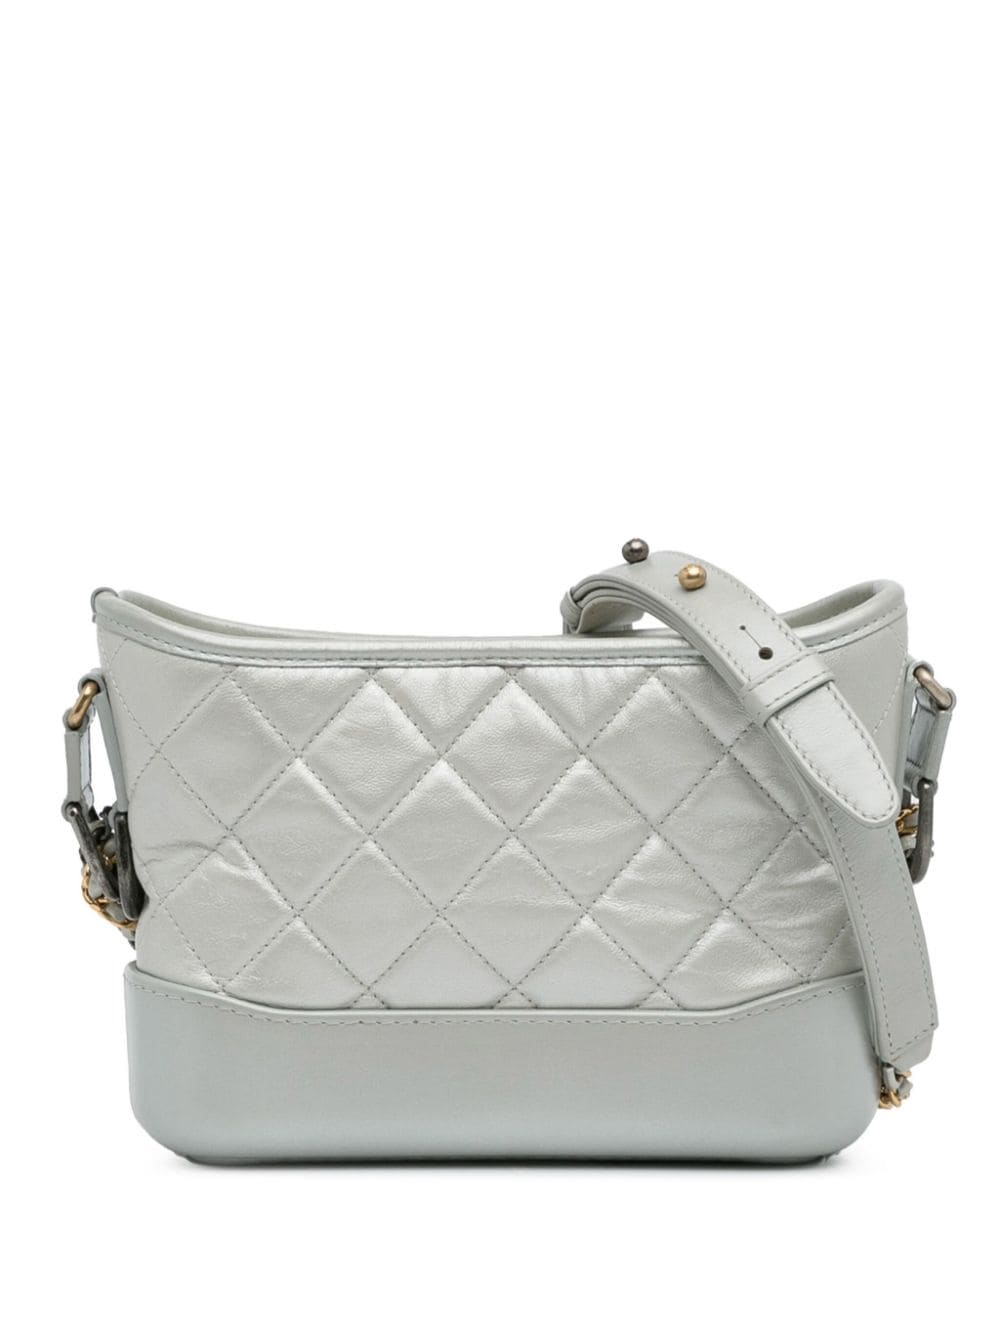 Pre-owned Chanel 2019 Small Gabrielle Shoulder Bag In Silver